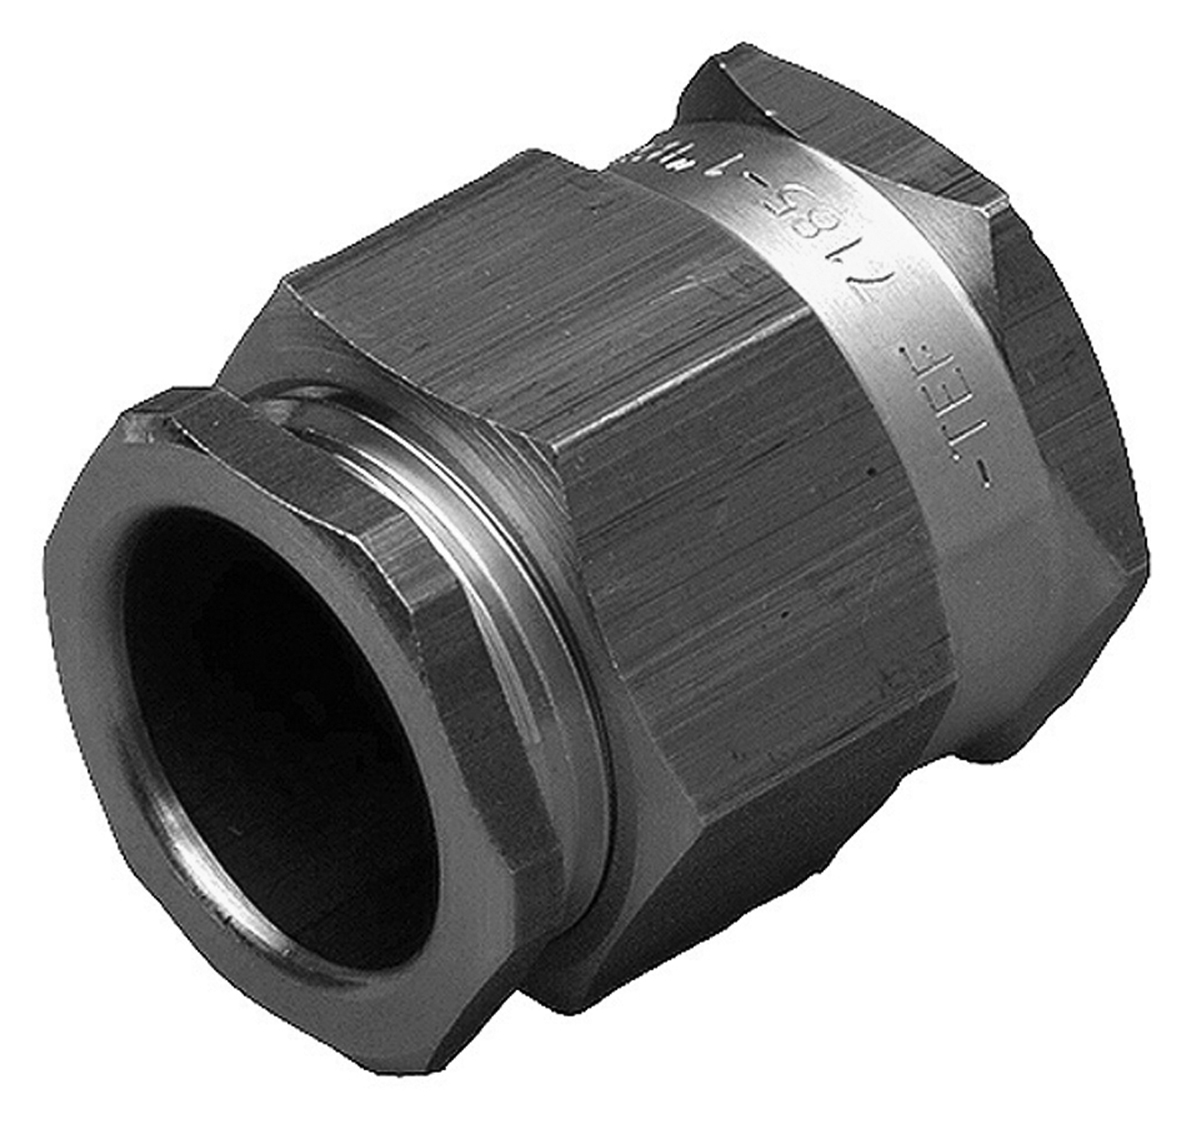 TEF 7184 Pipe Ending Gland: 3/4